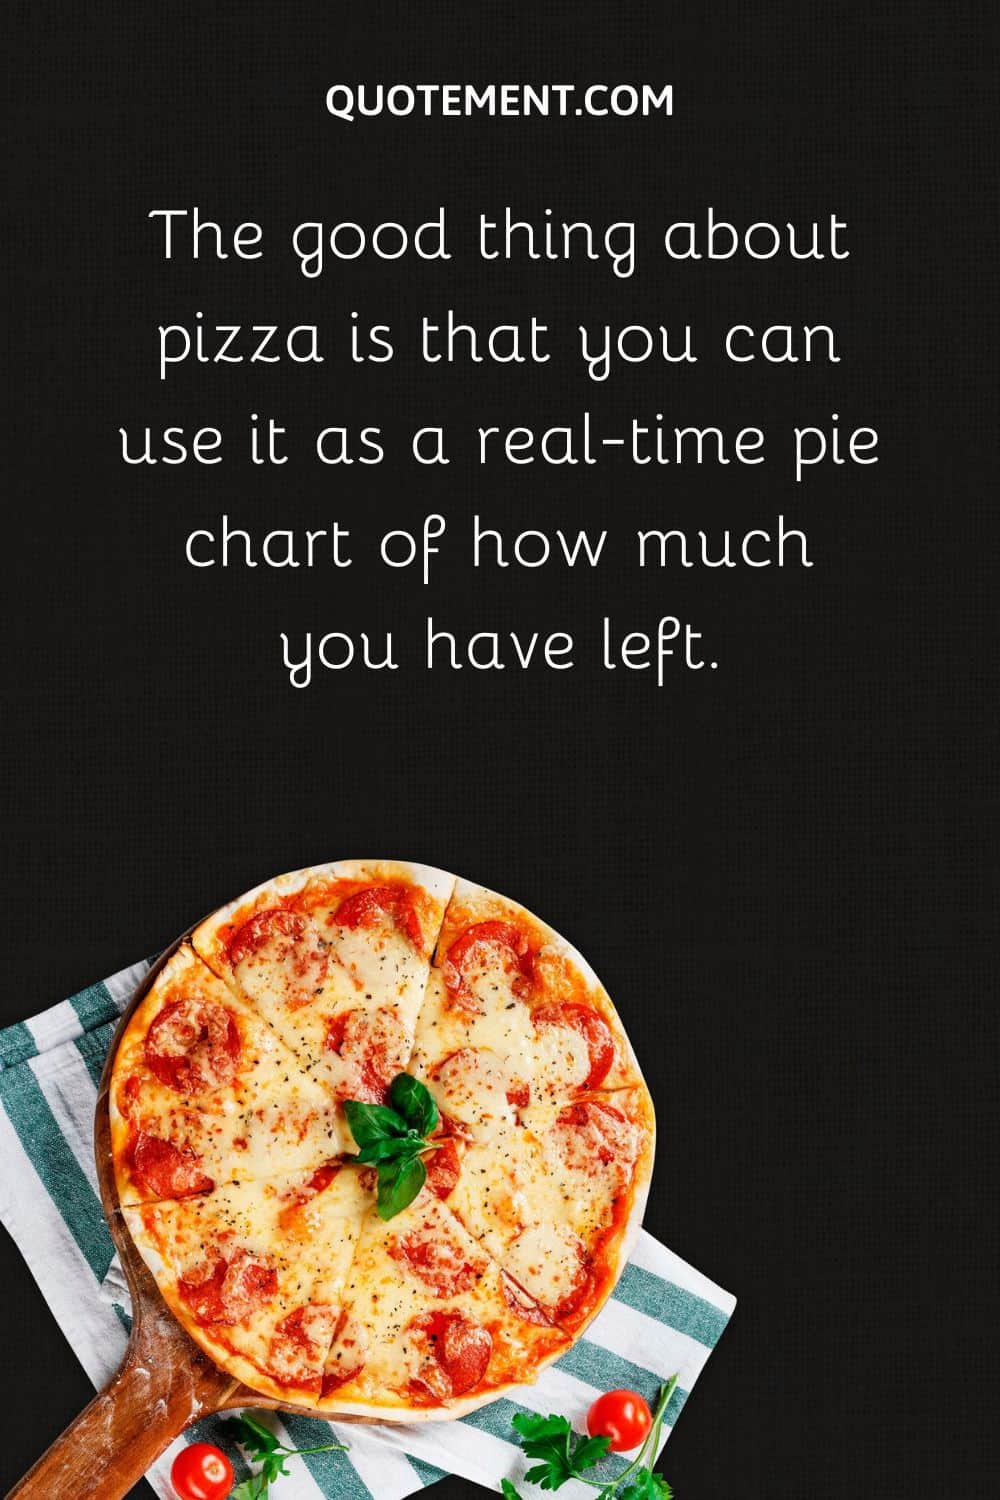 The good thing about pizza is that you can use it as a real-time pie chart of how much you have left